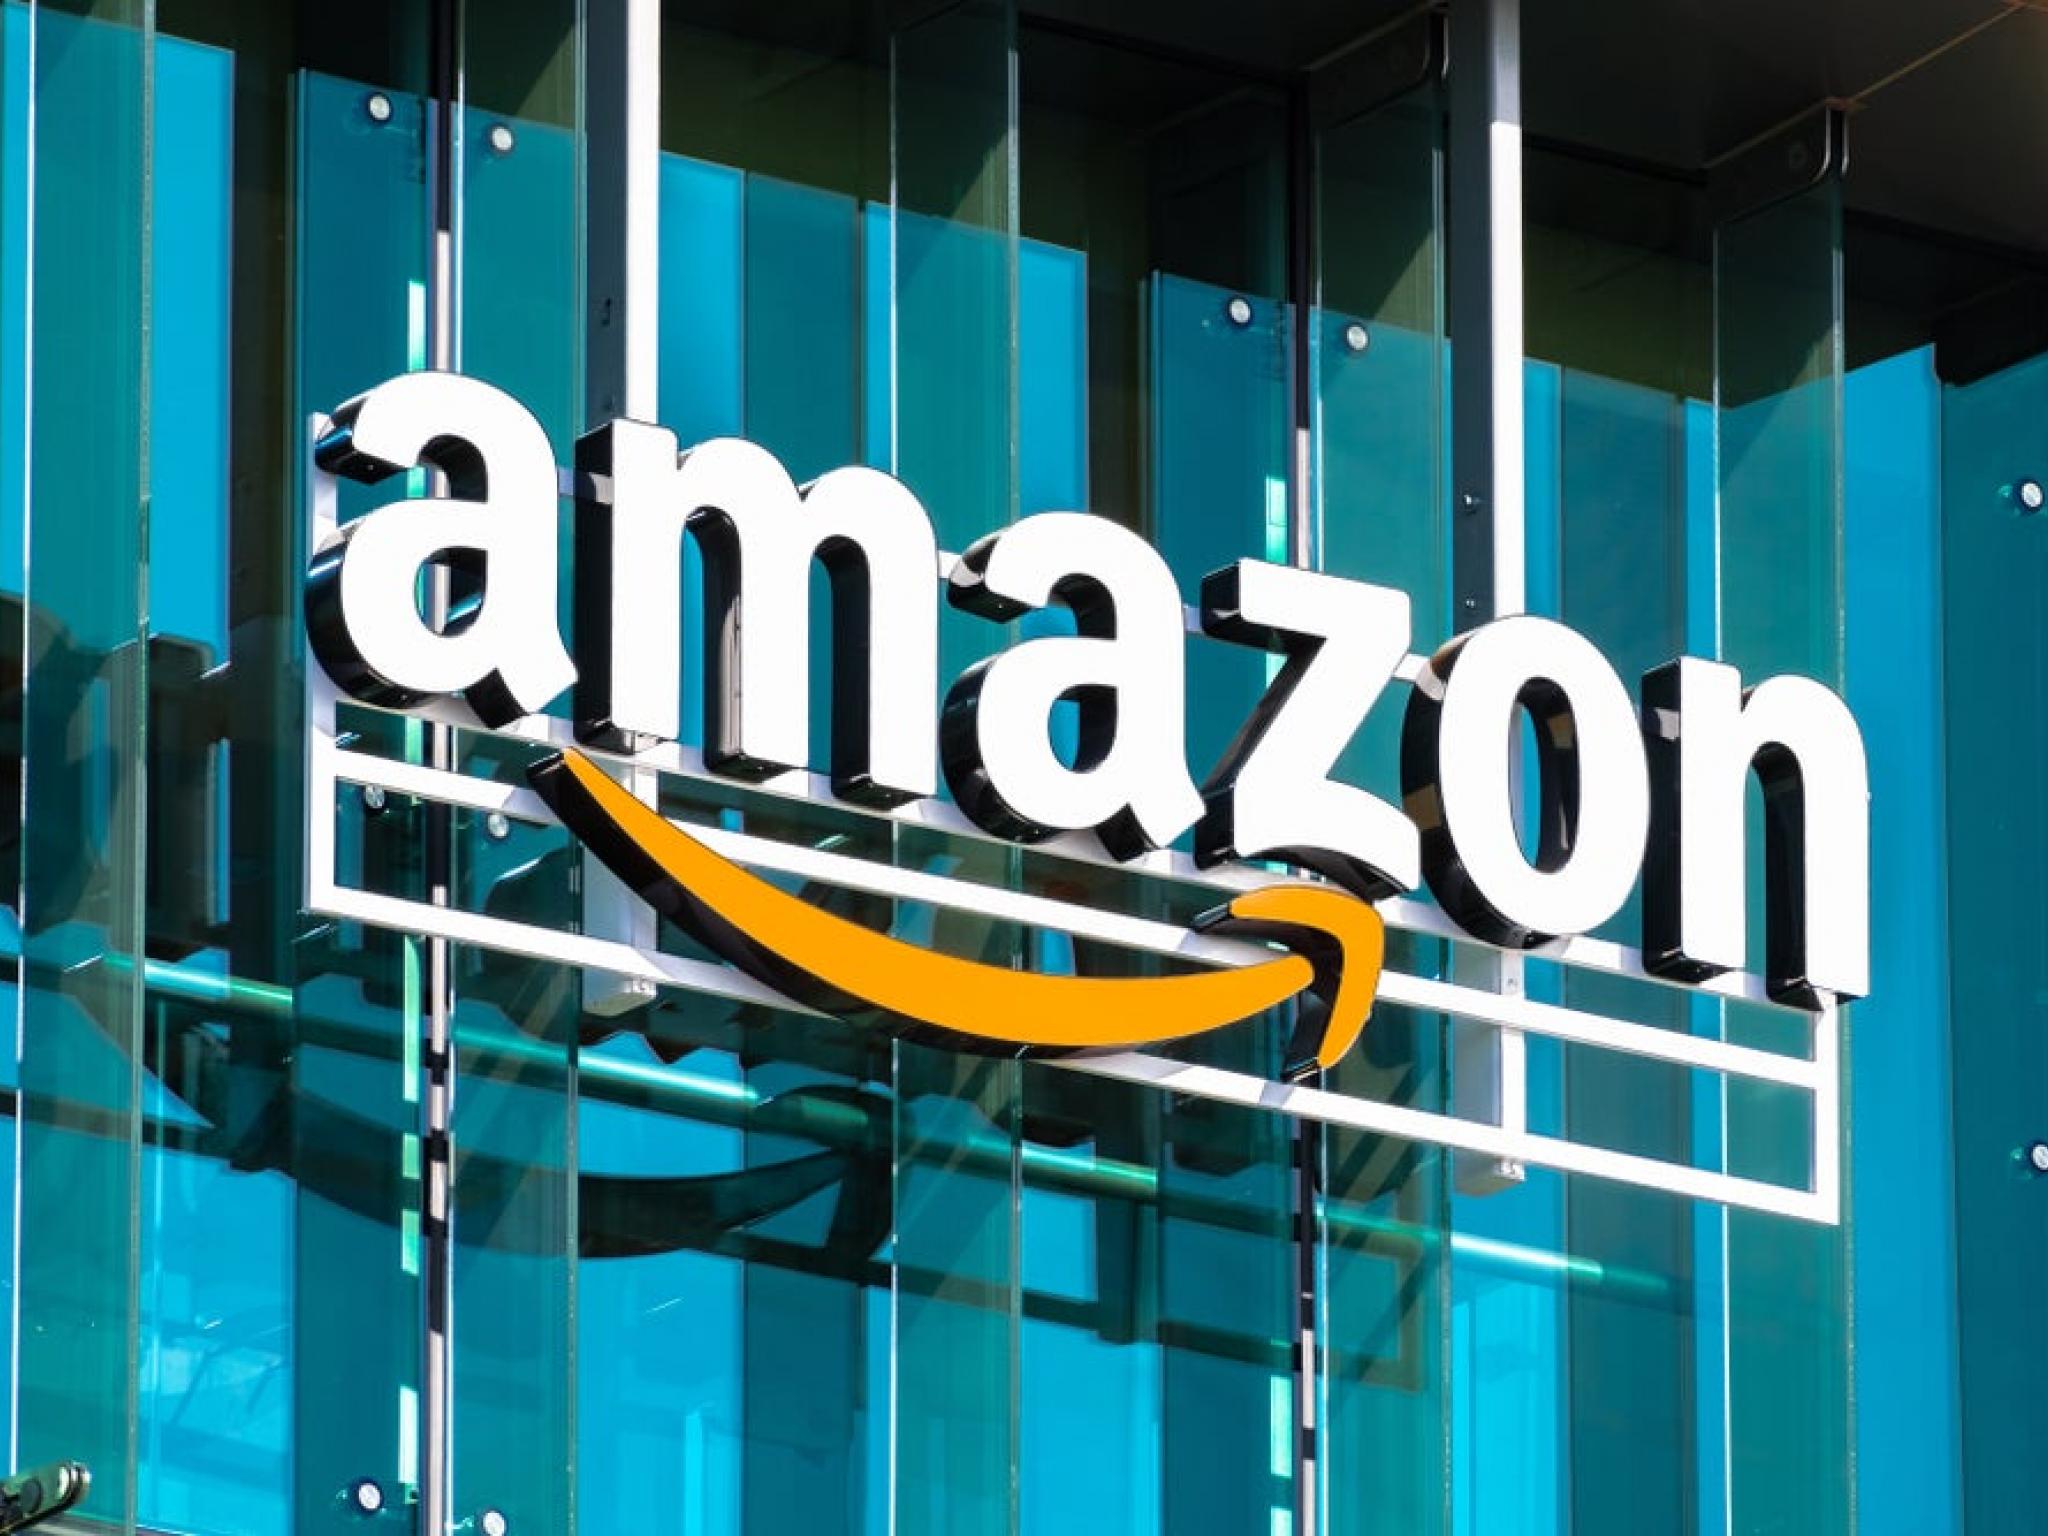  amazons-aws-growth-expected-to-outpace-microsoft-azure-analyst-optimistic 